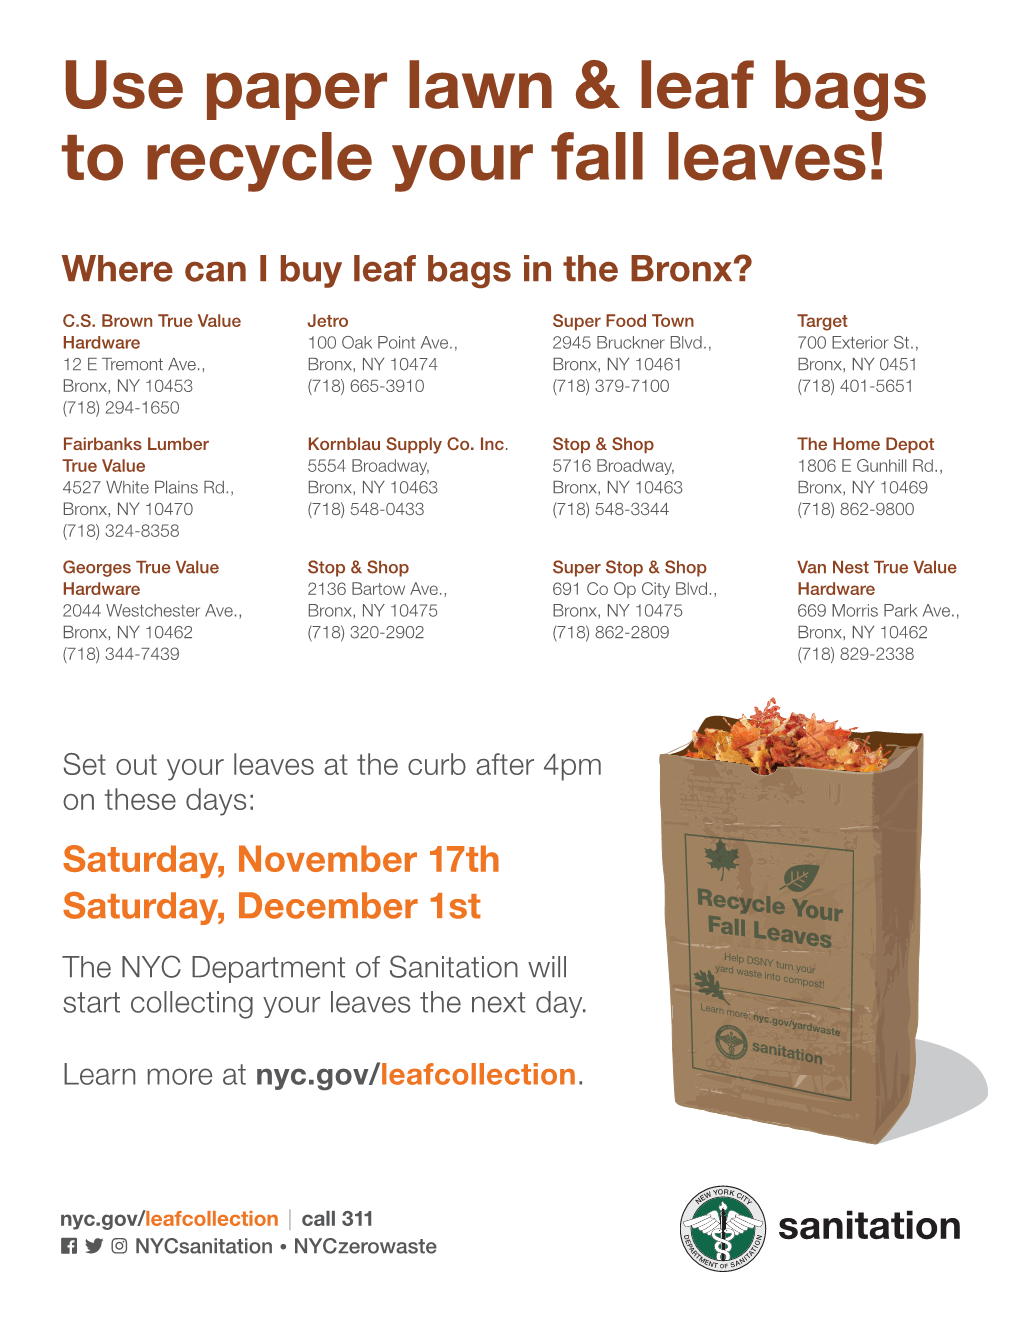 Use Paper Lawn & Leaf Bags to Recycle Your Fall Leaves!